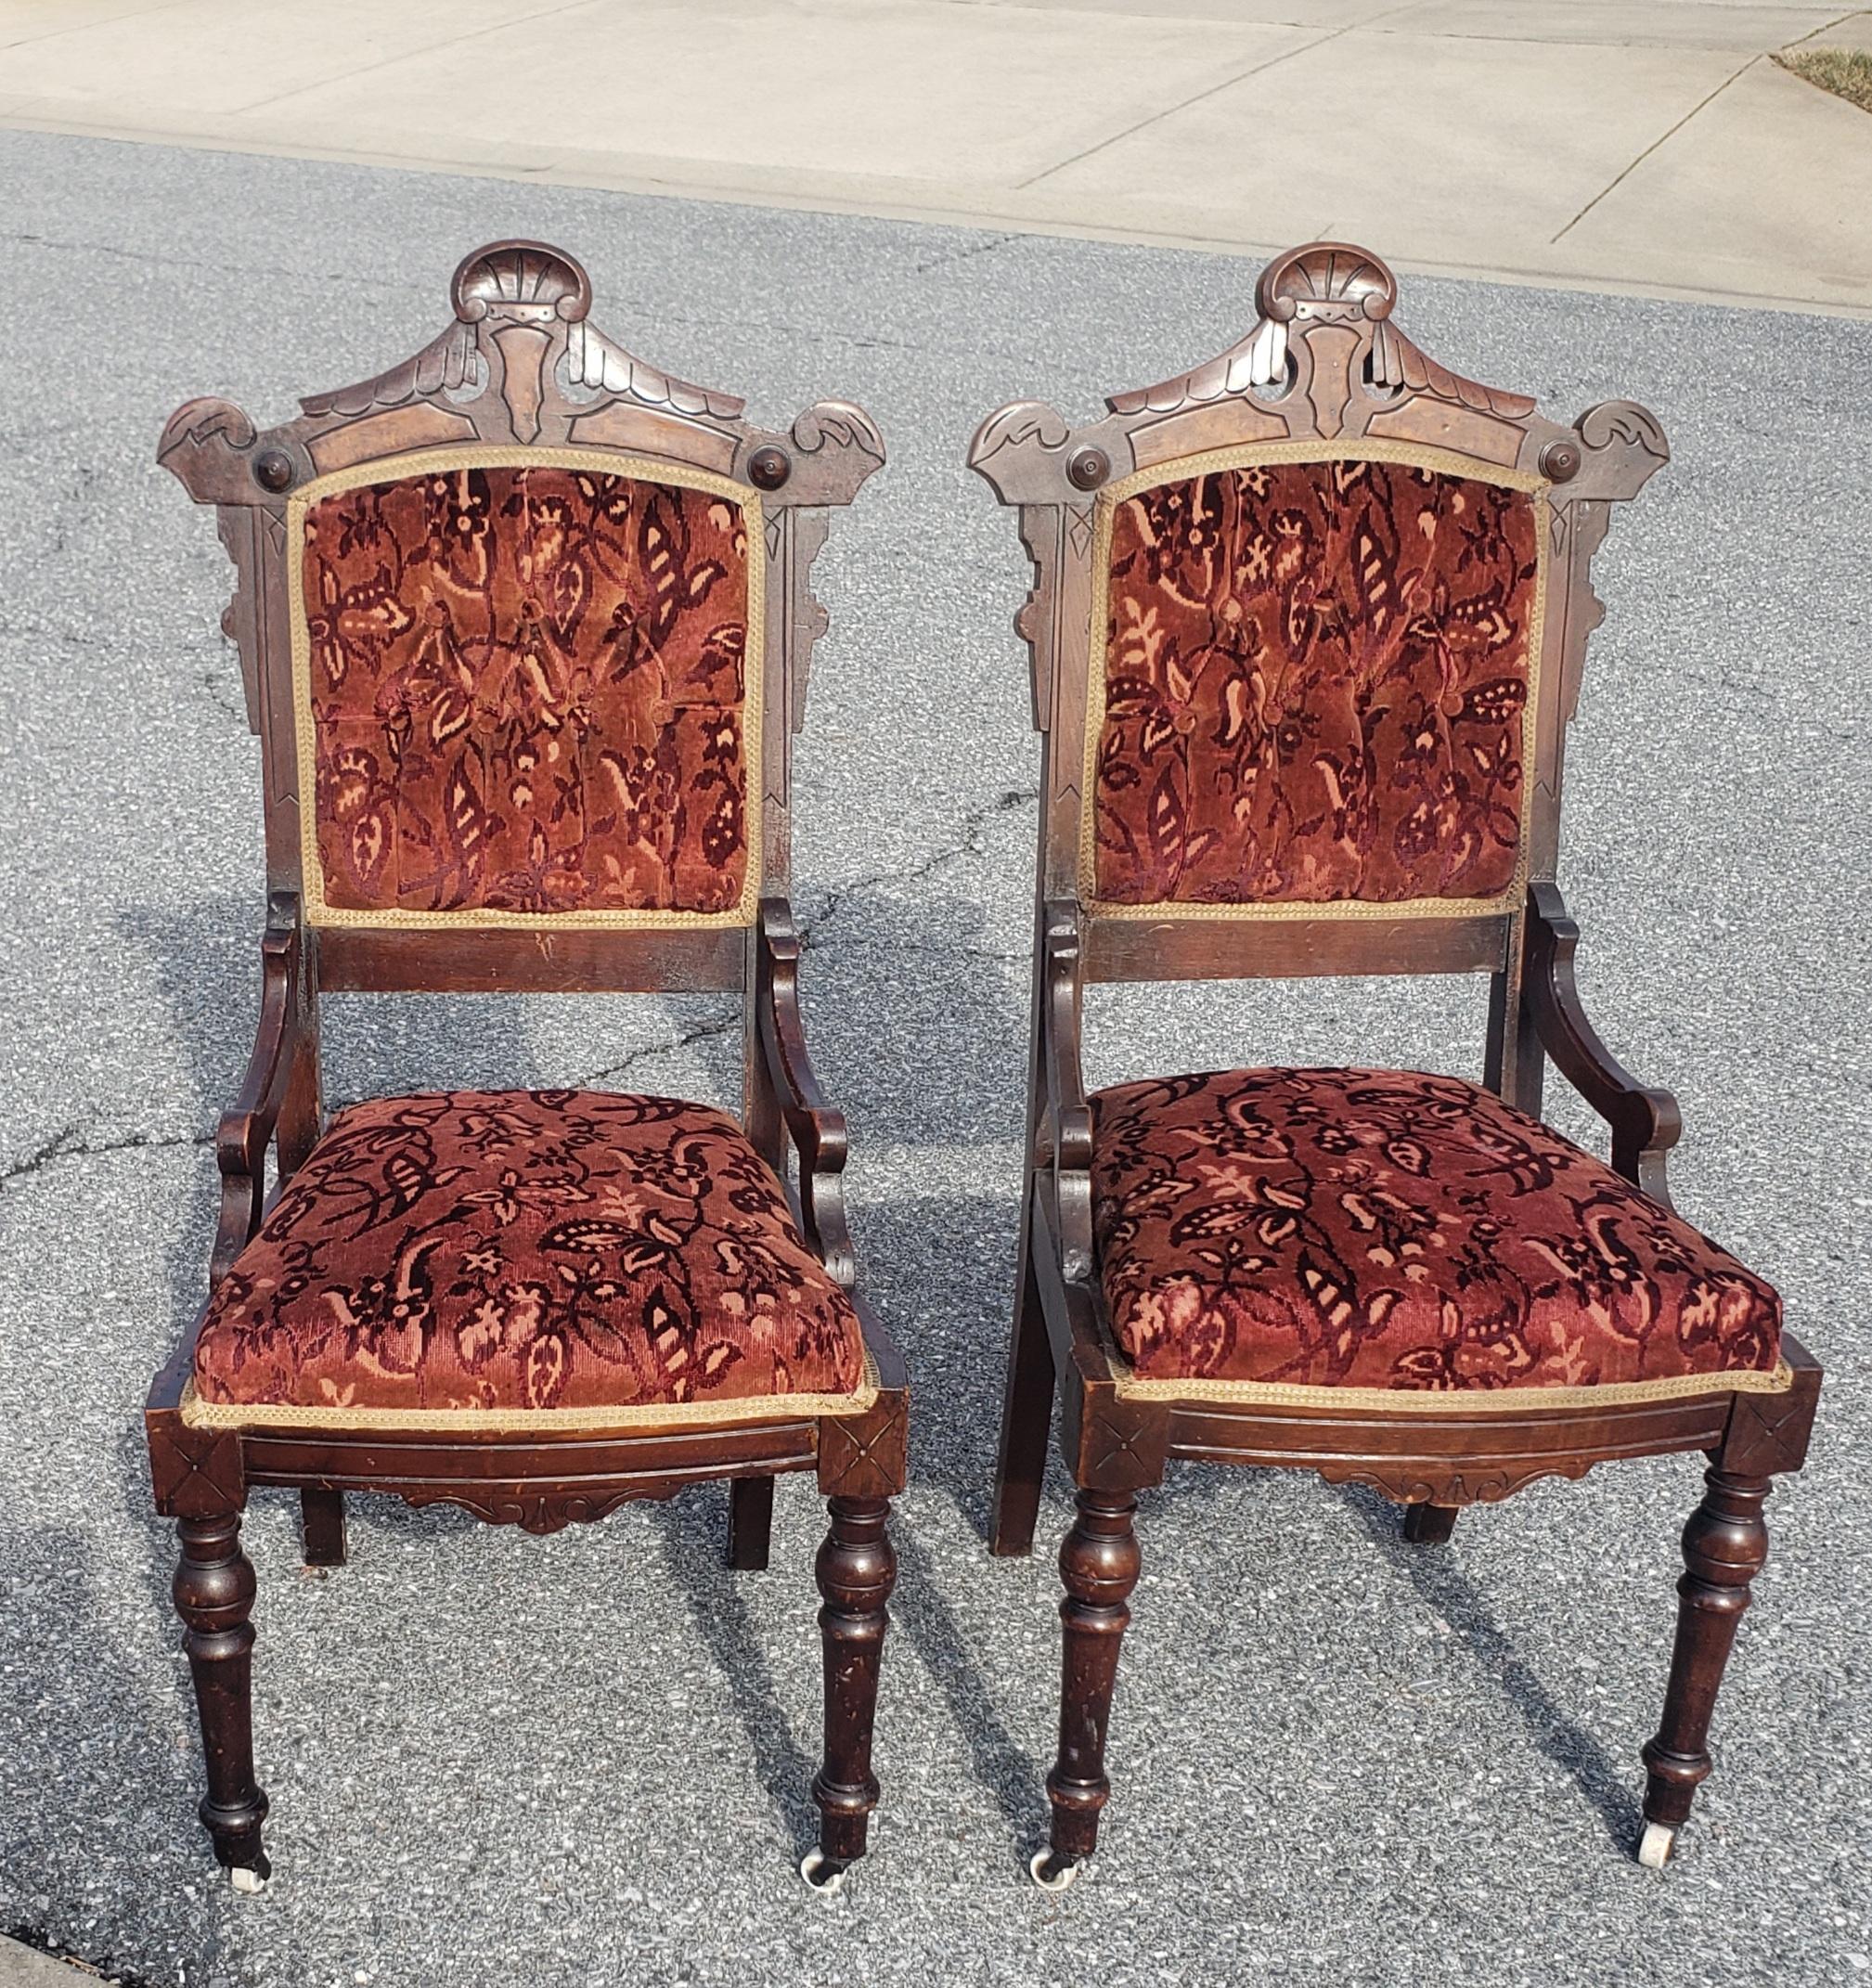 Pair of 1920s Philips & Philips furniture Victorian walnut and cut velvet upholstered chairs hip rest in very good condition. Chairs have been reupholstered and refinished recently. Very firm seats with spring.